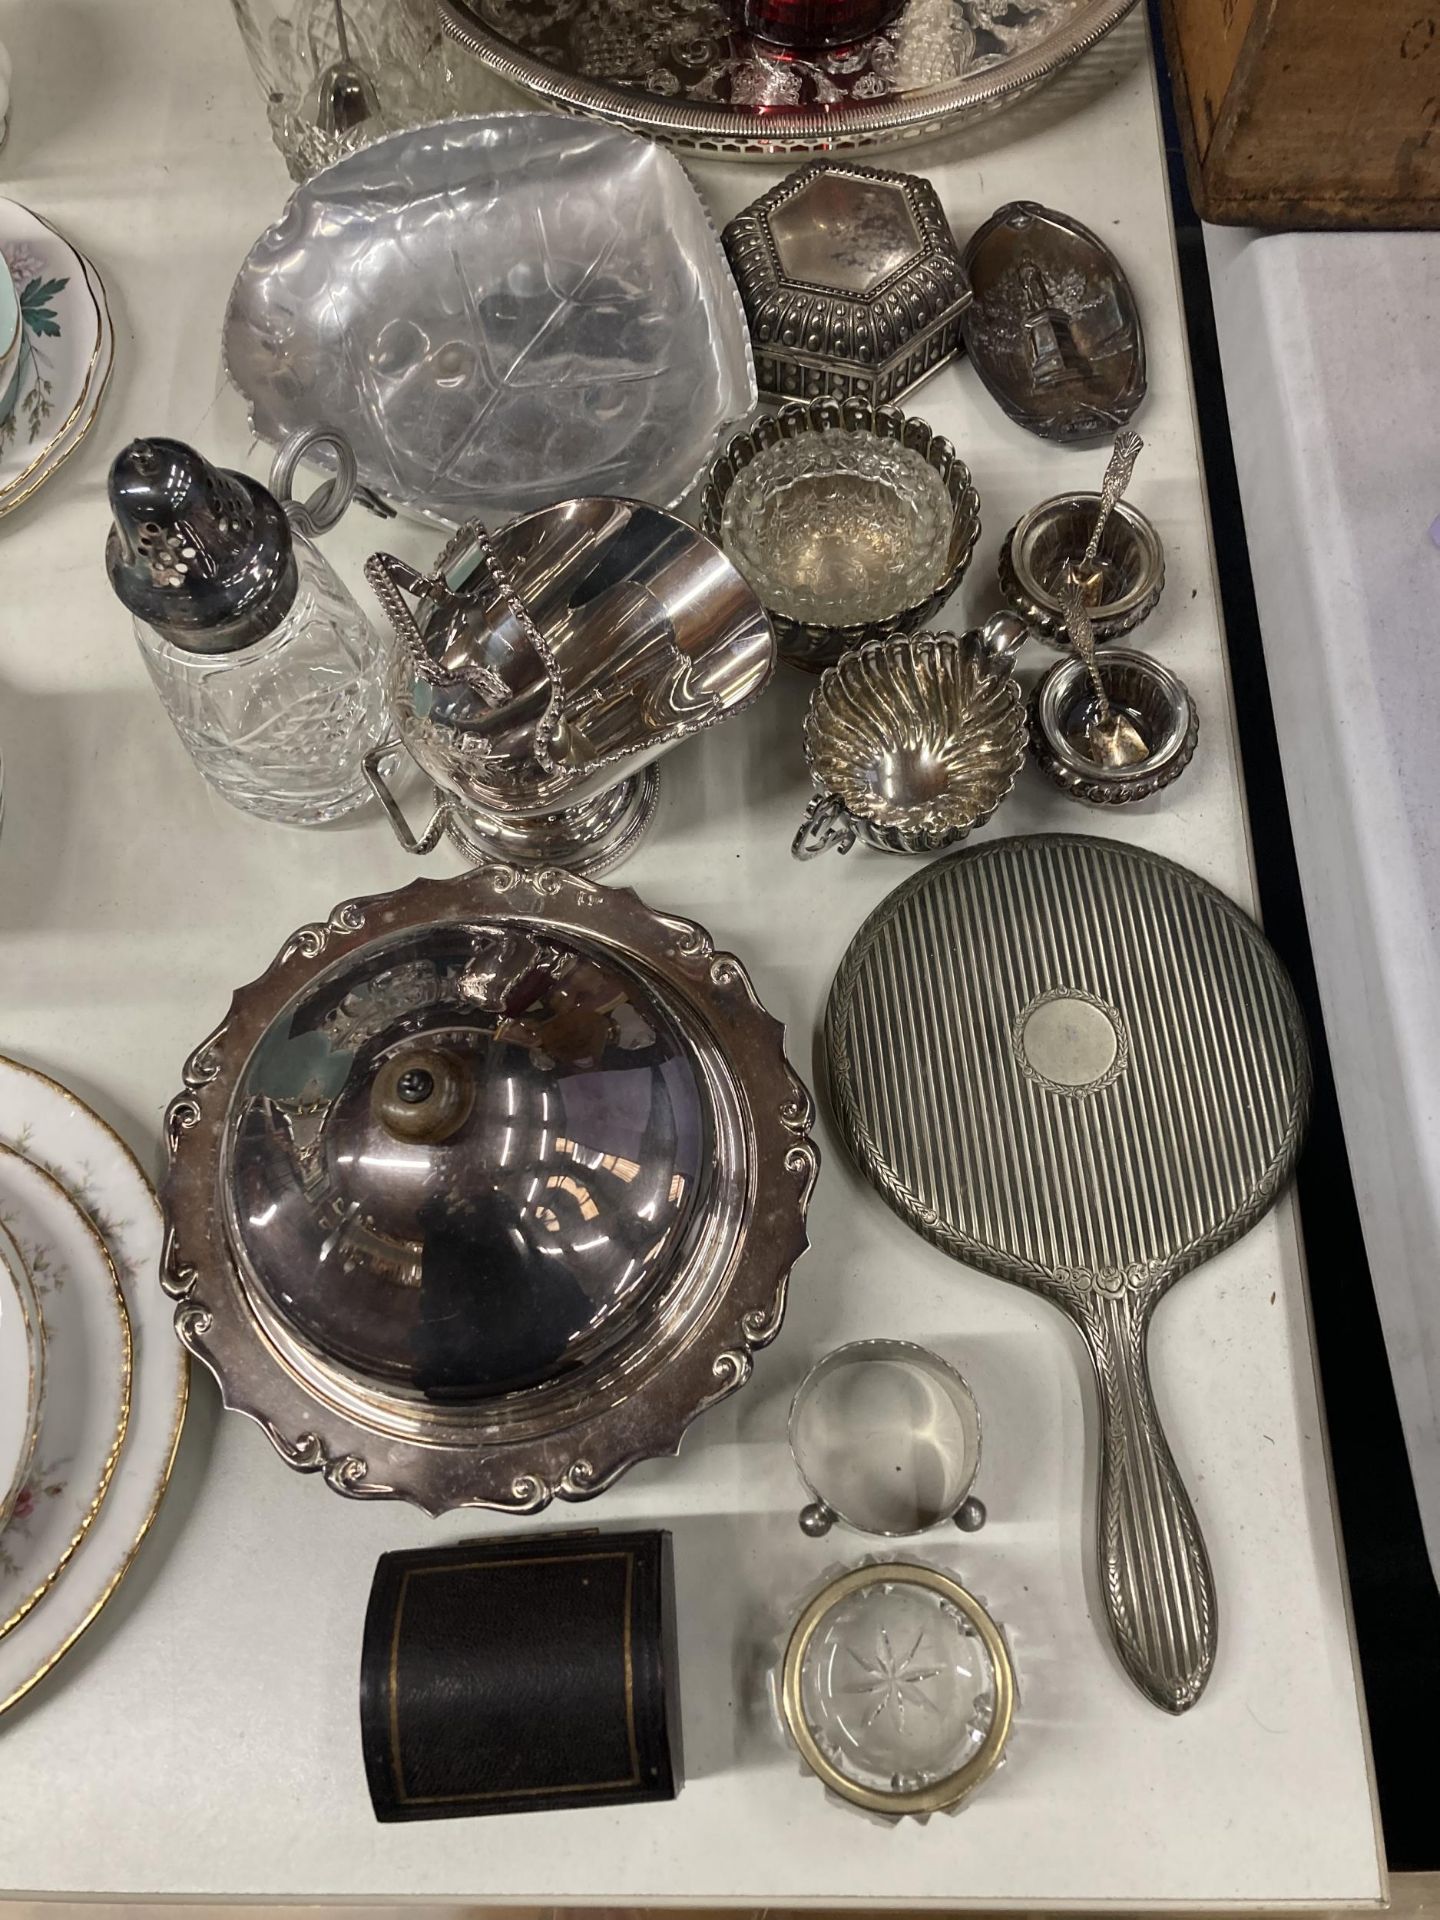 A LARGE QUANTITY OF SILVER PLATE TO INCLUDE A BUTTER DISH, MIRROR, FLOUR SHAKER, TRAY, NAPKINS, - Image 2 of 6